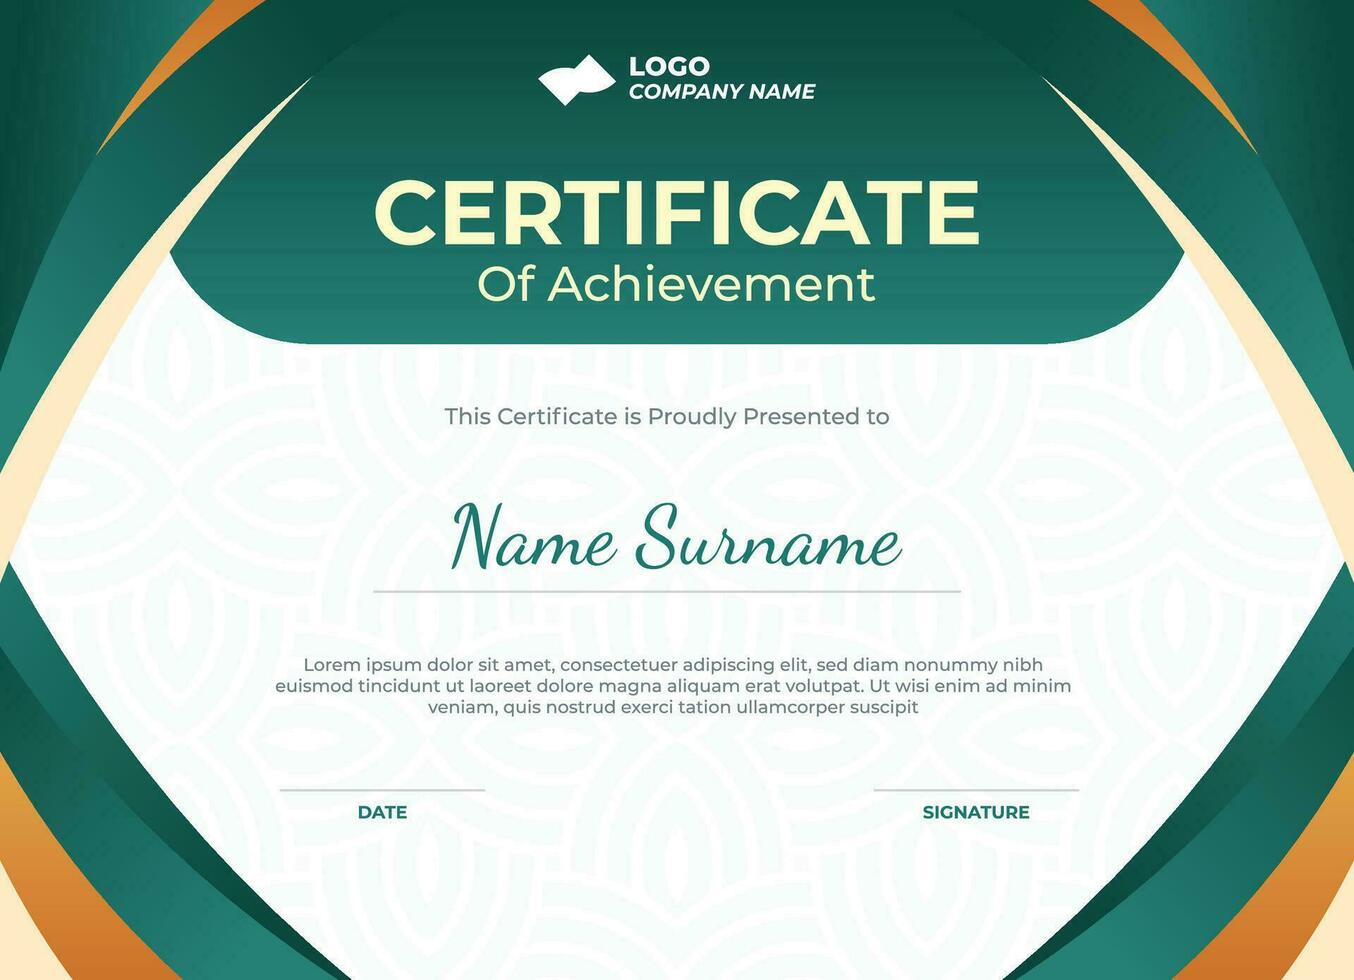 Modern Certificate Template Vector Design in green and gold